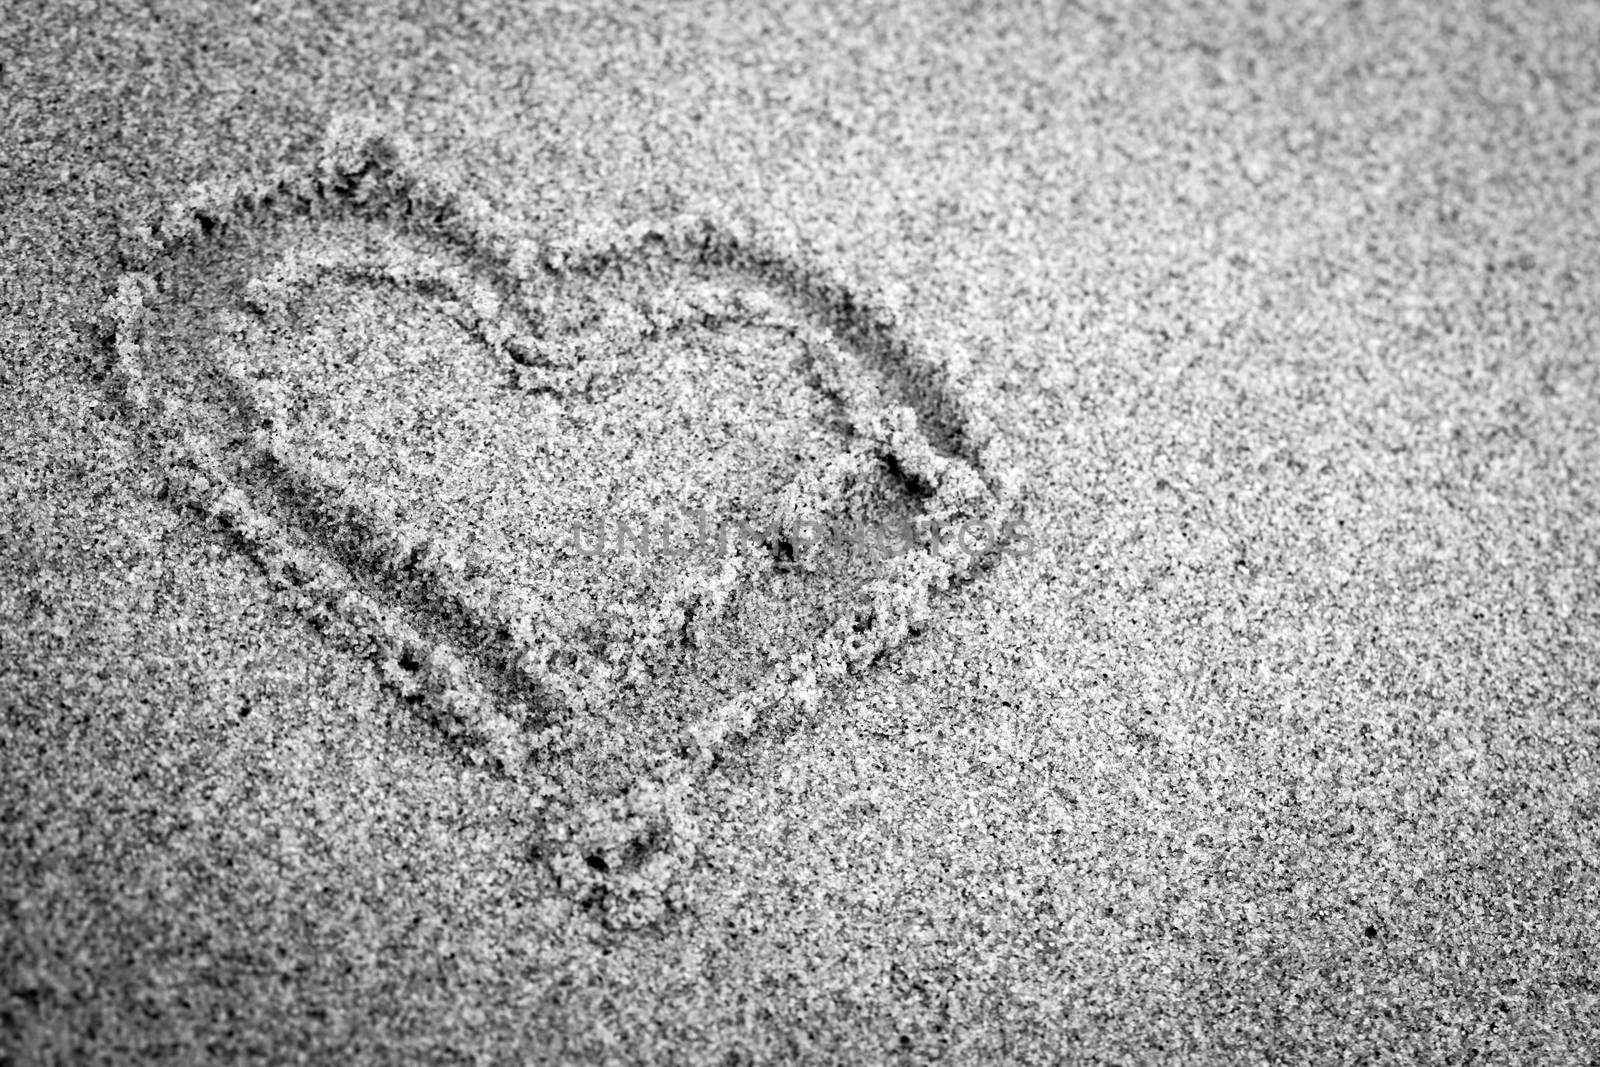 Heart shape on sand. Romantic, black and white, hand drawn.